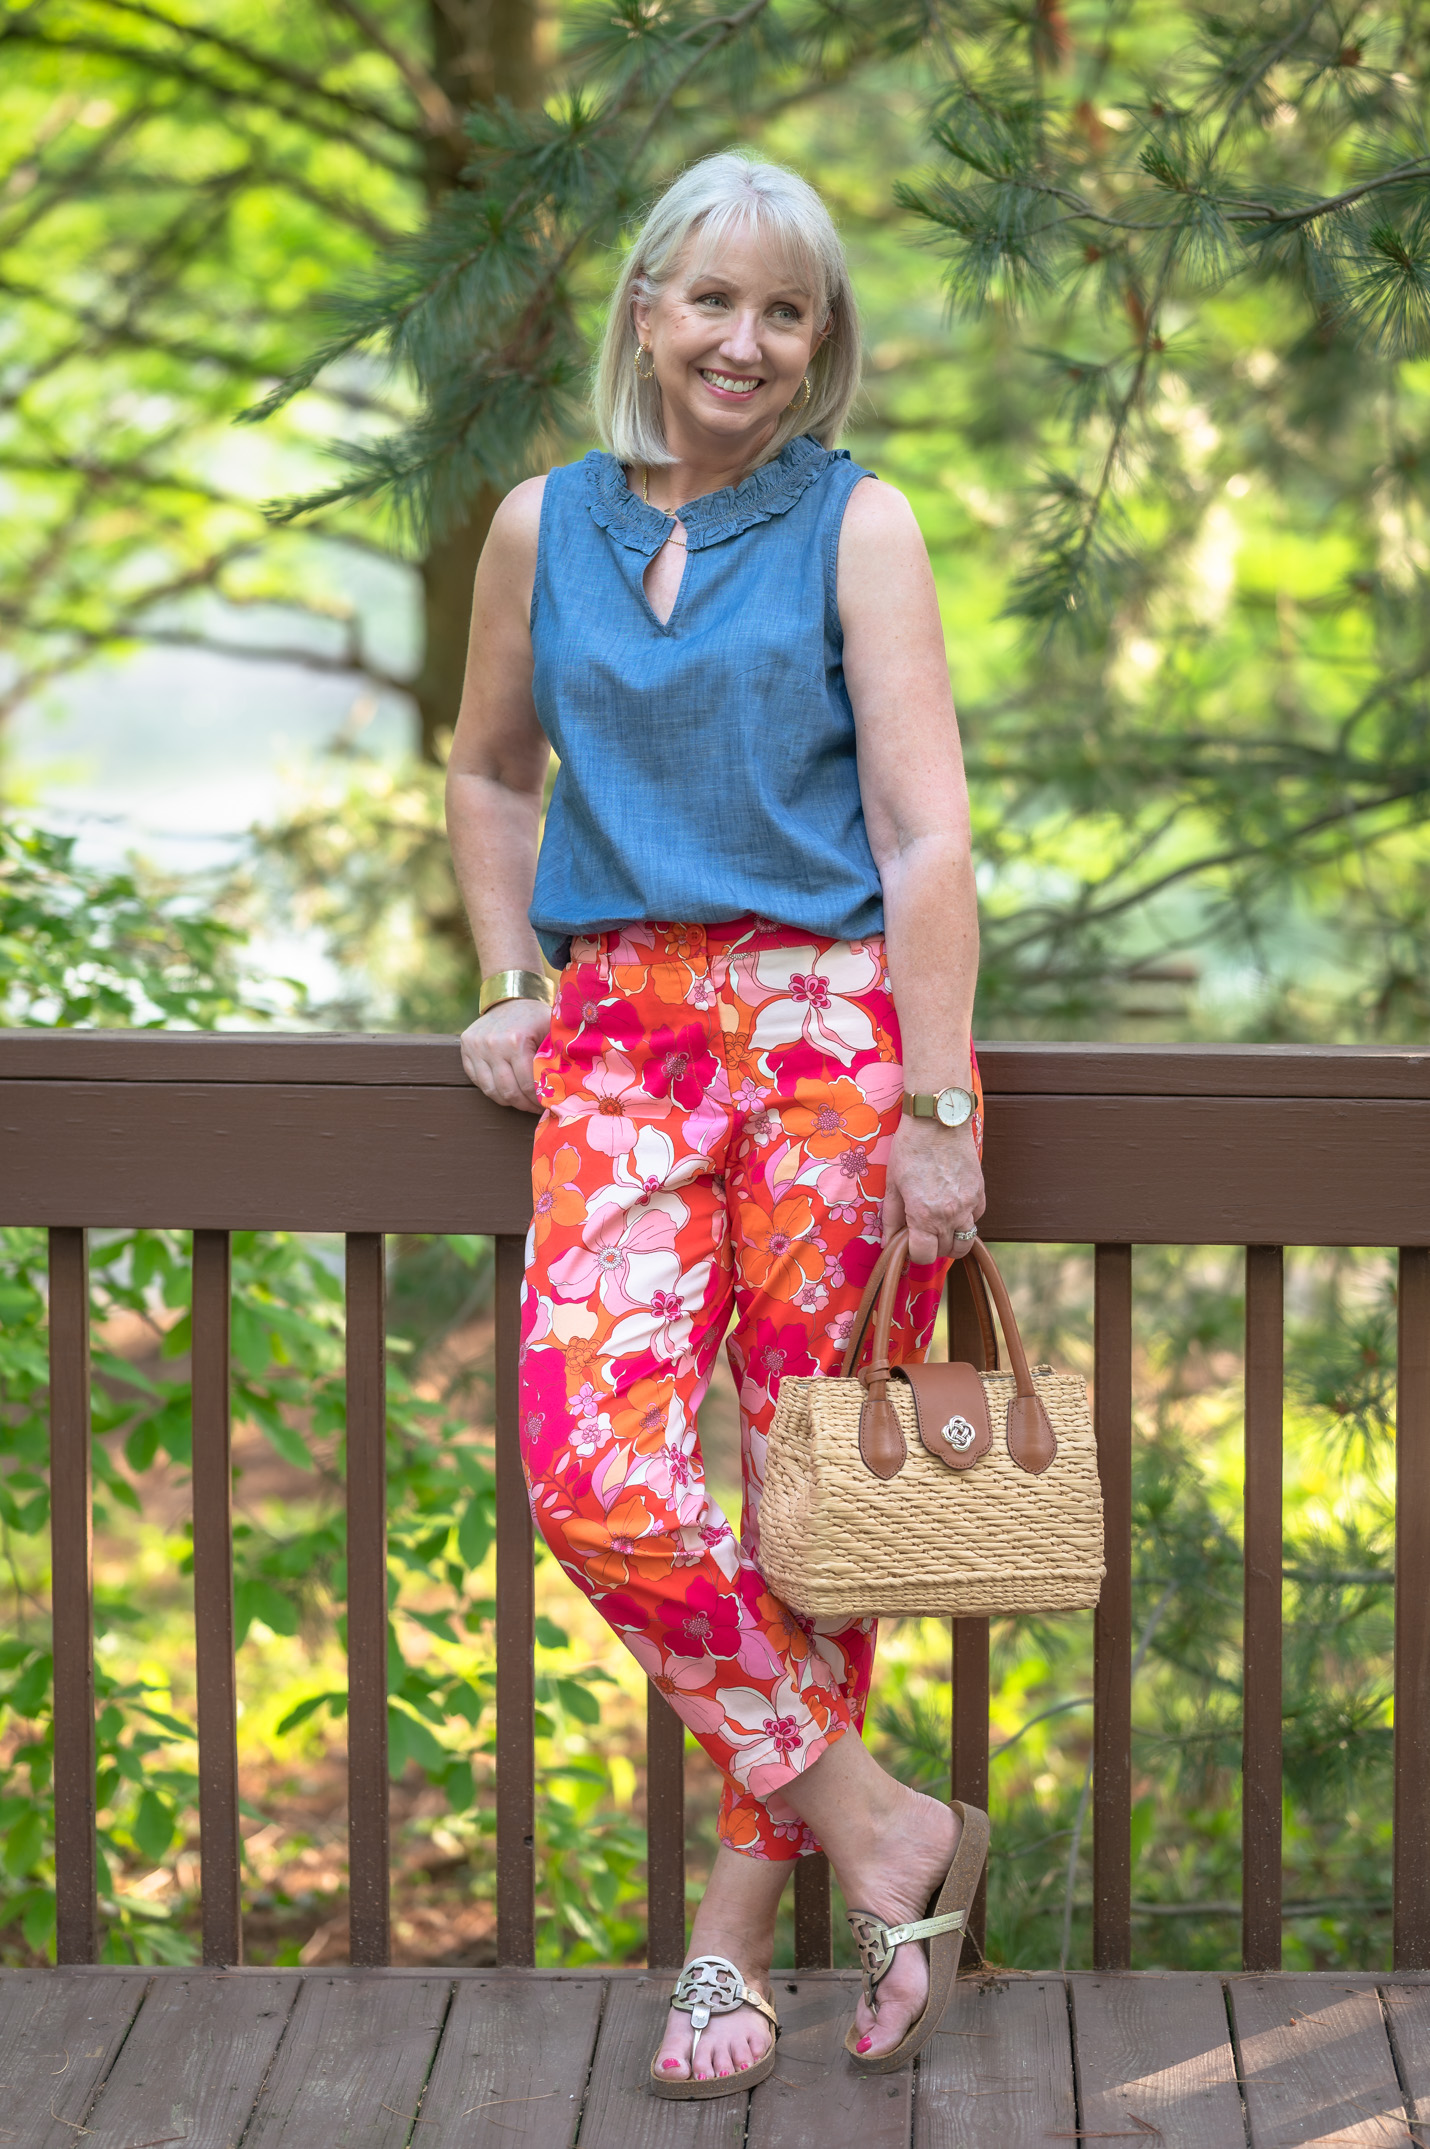 Wearing Print Pants in the Summer Over 50